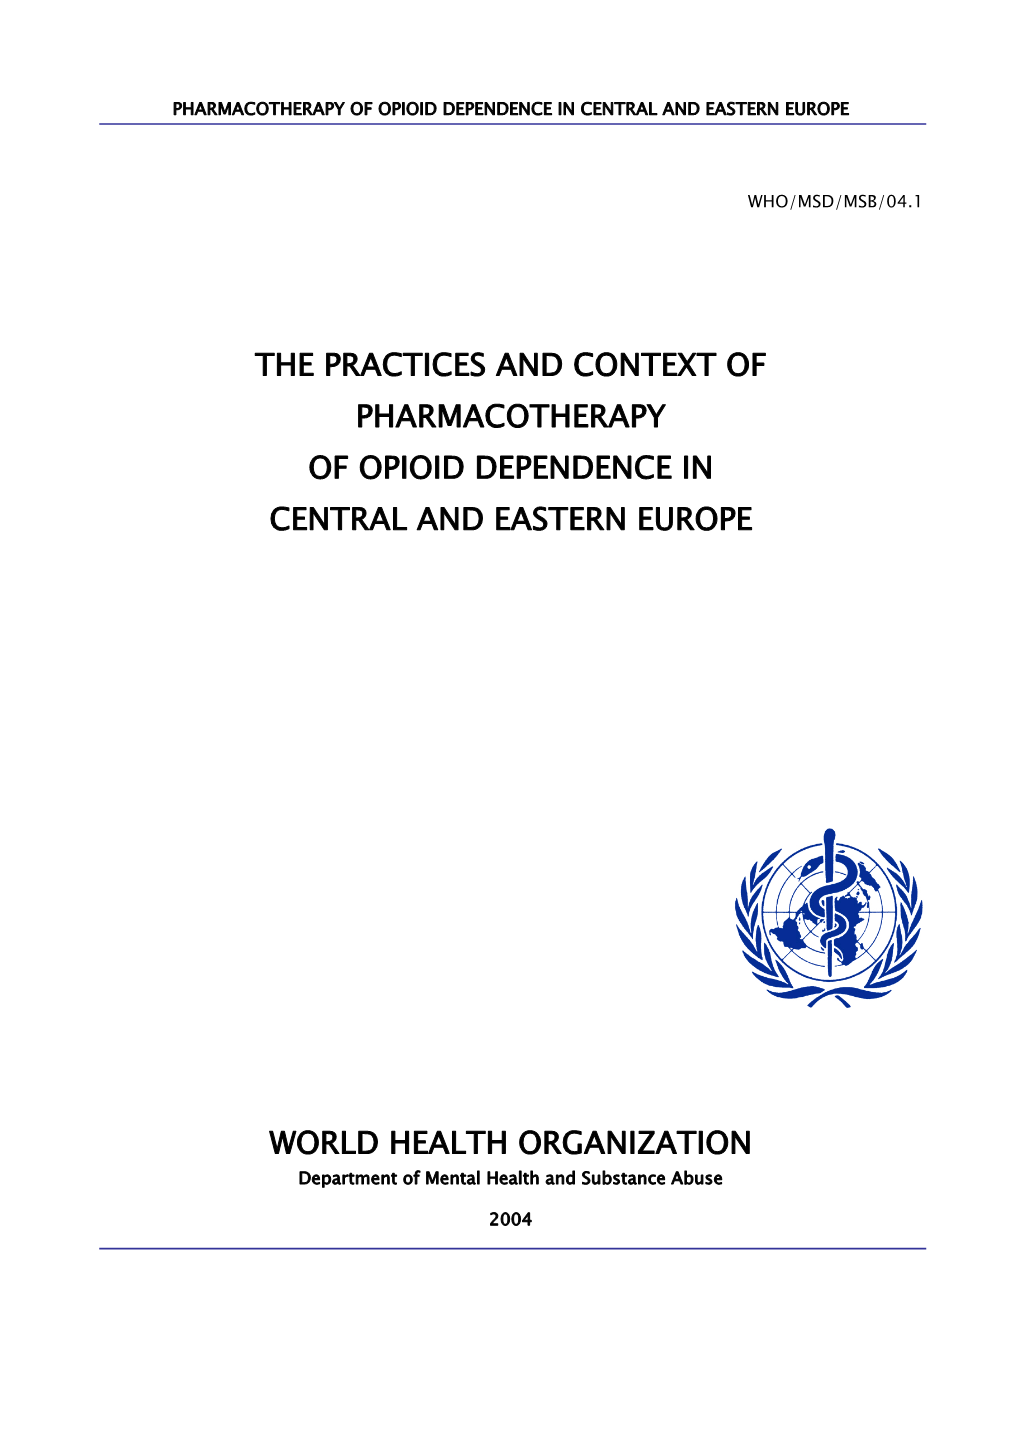 The Practices and Context of Pharmacotherapy of Opioid Dependence in Central and Eastern Europe